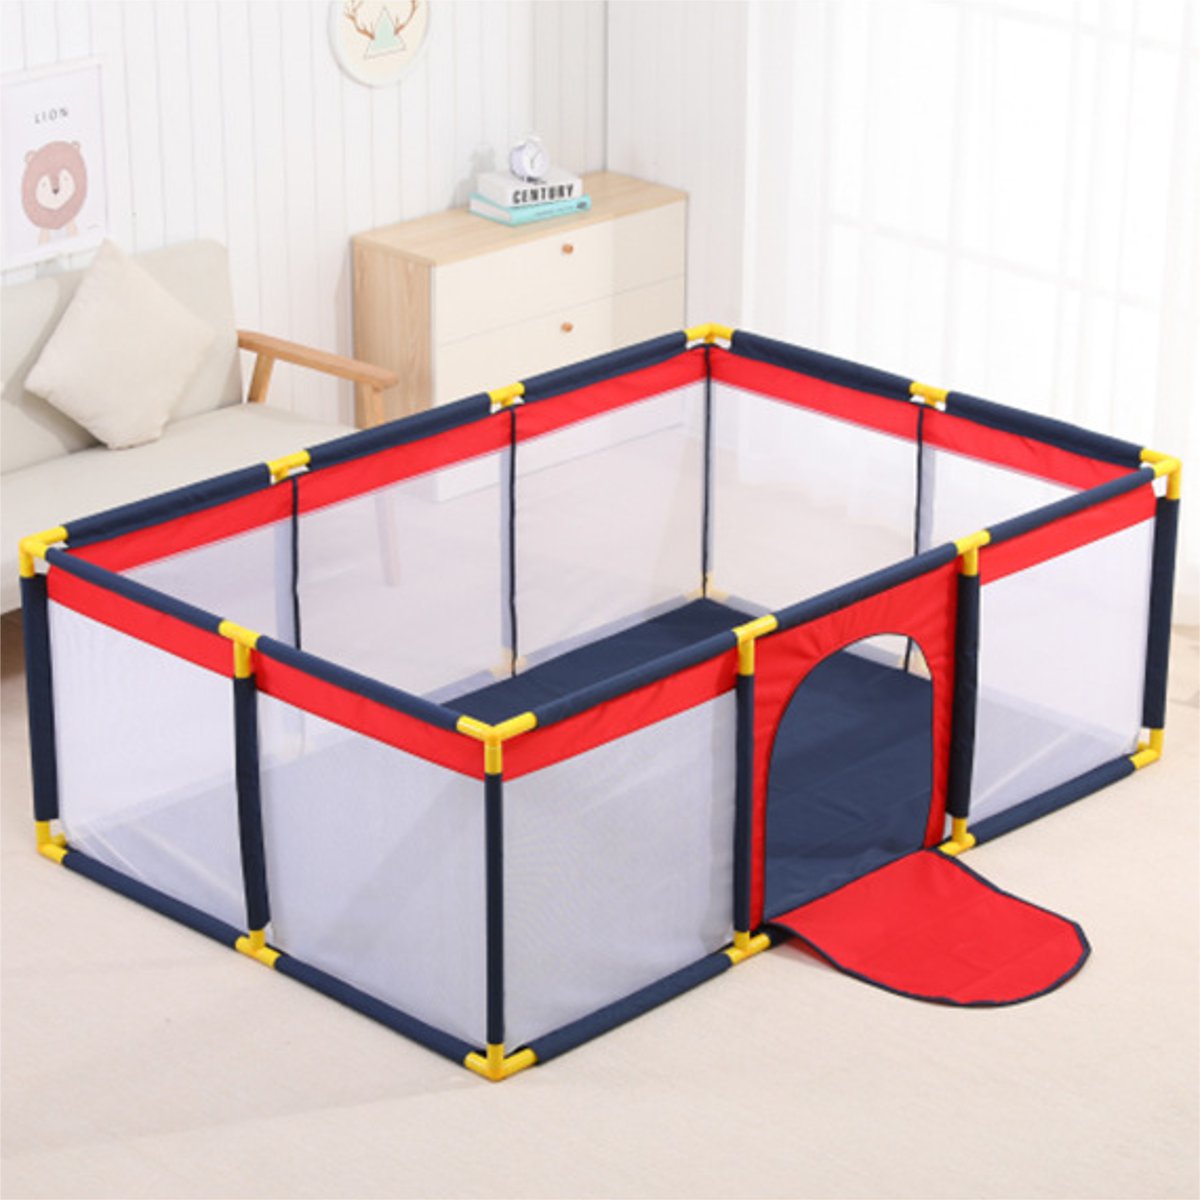 Childrens-Play-Fence-Baby-Safety-Fence-Foldable-Fence-Childrens-Indoor-Fence-Toys-1688114-4